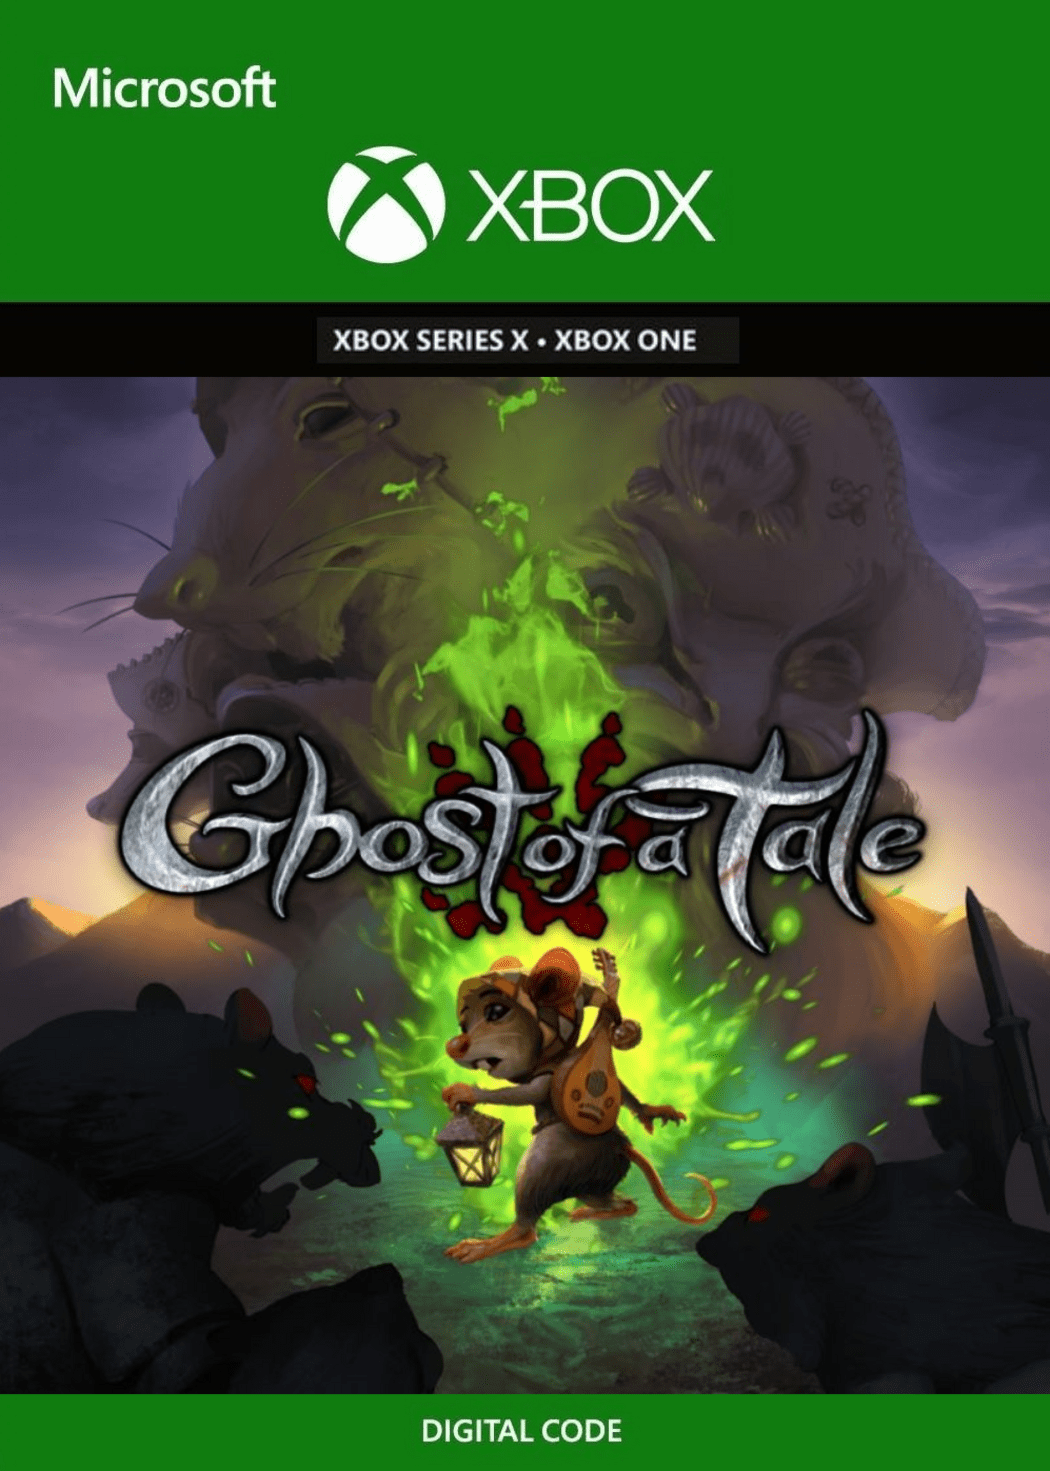 Peuter Bevoorrecht Kreta Buy Ghost of a Tale Xbox key at the Best Price! | ENEBA